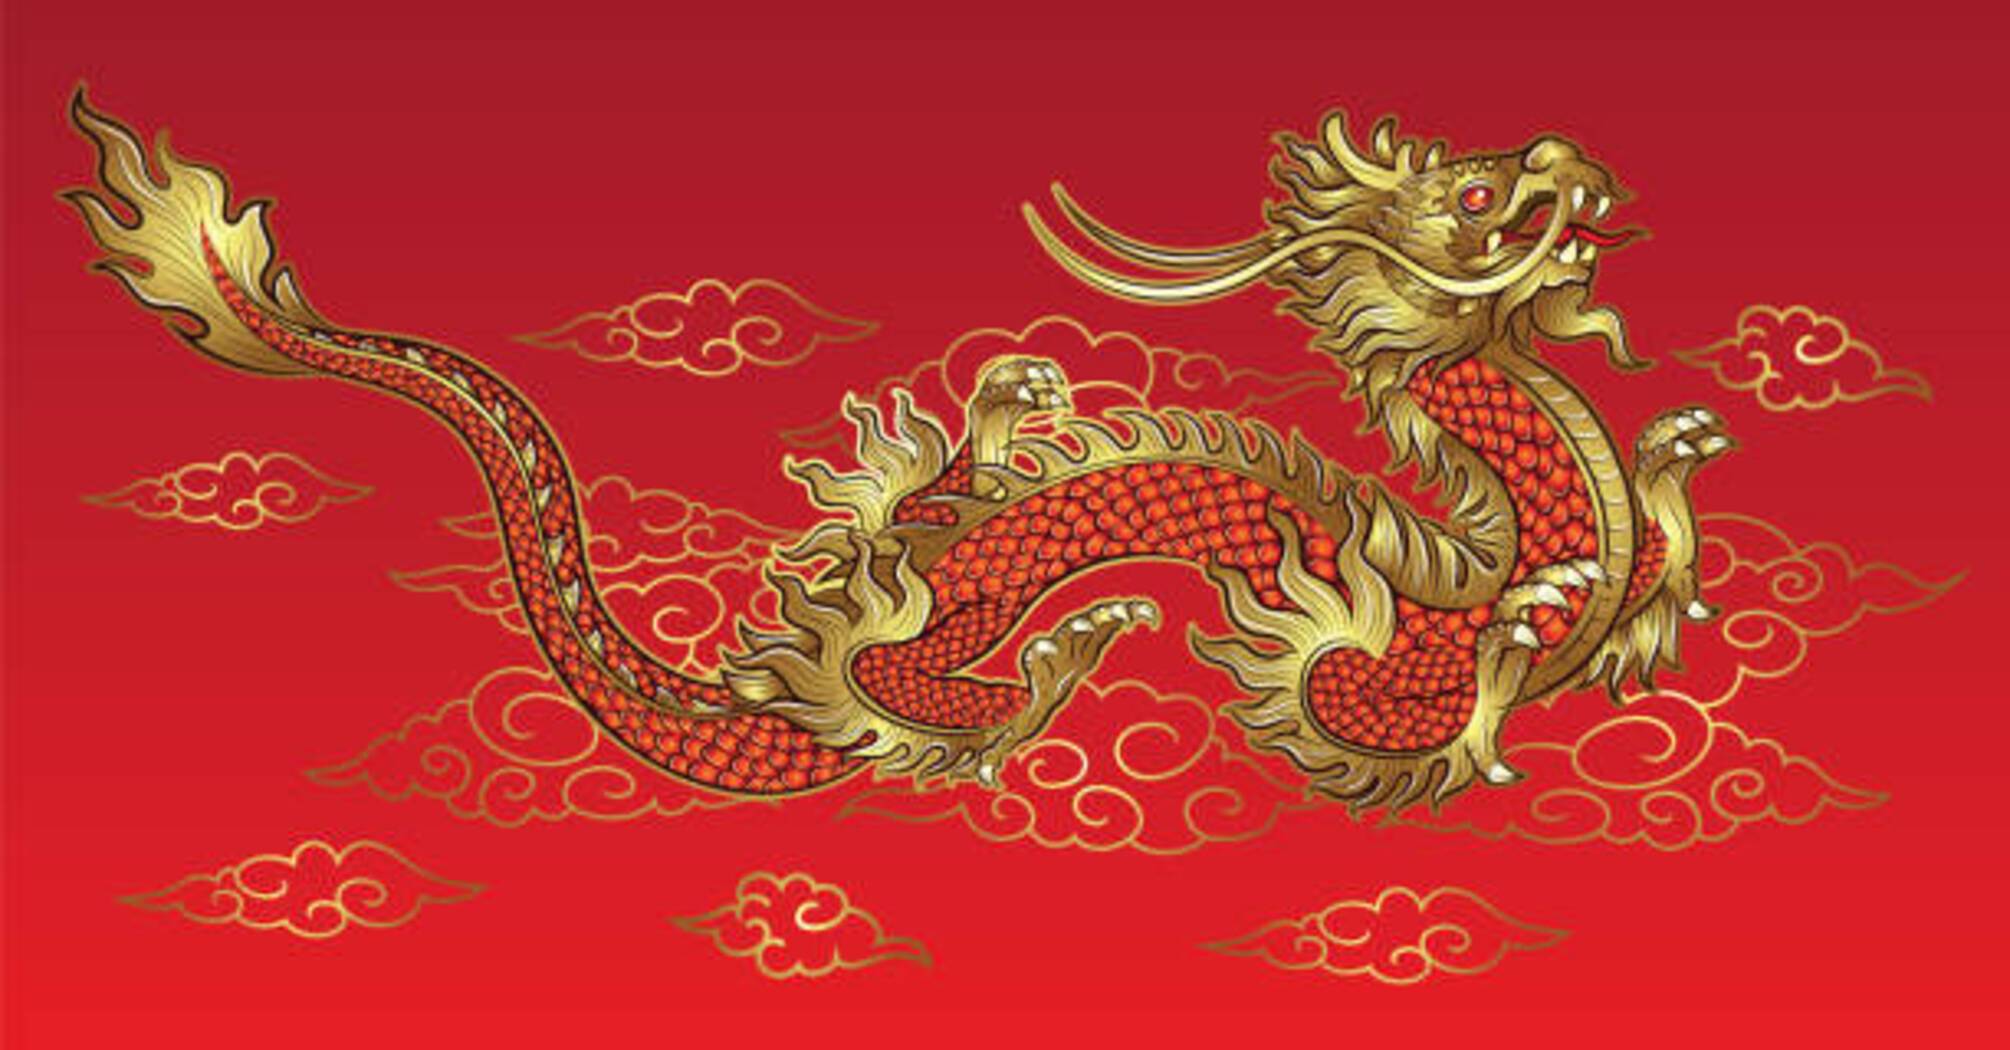 Expect a day filled with harmony and peace: Chinese horoscope for February 23